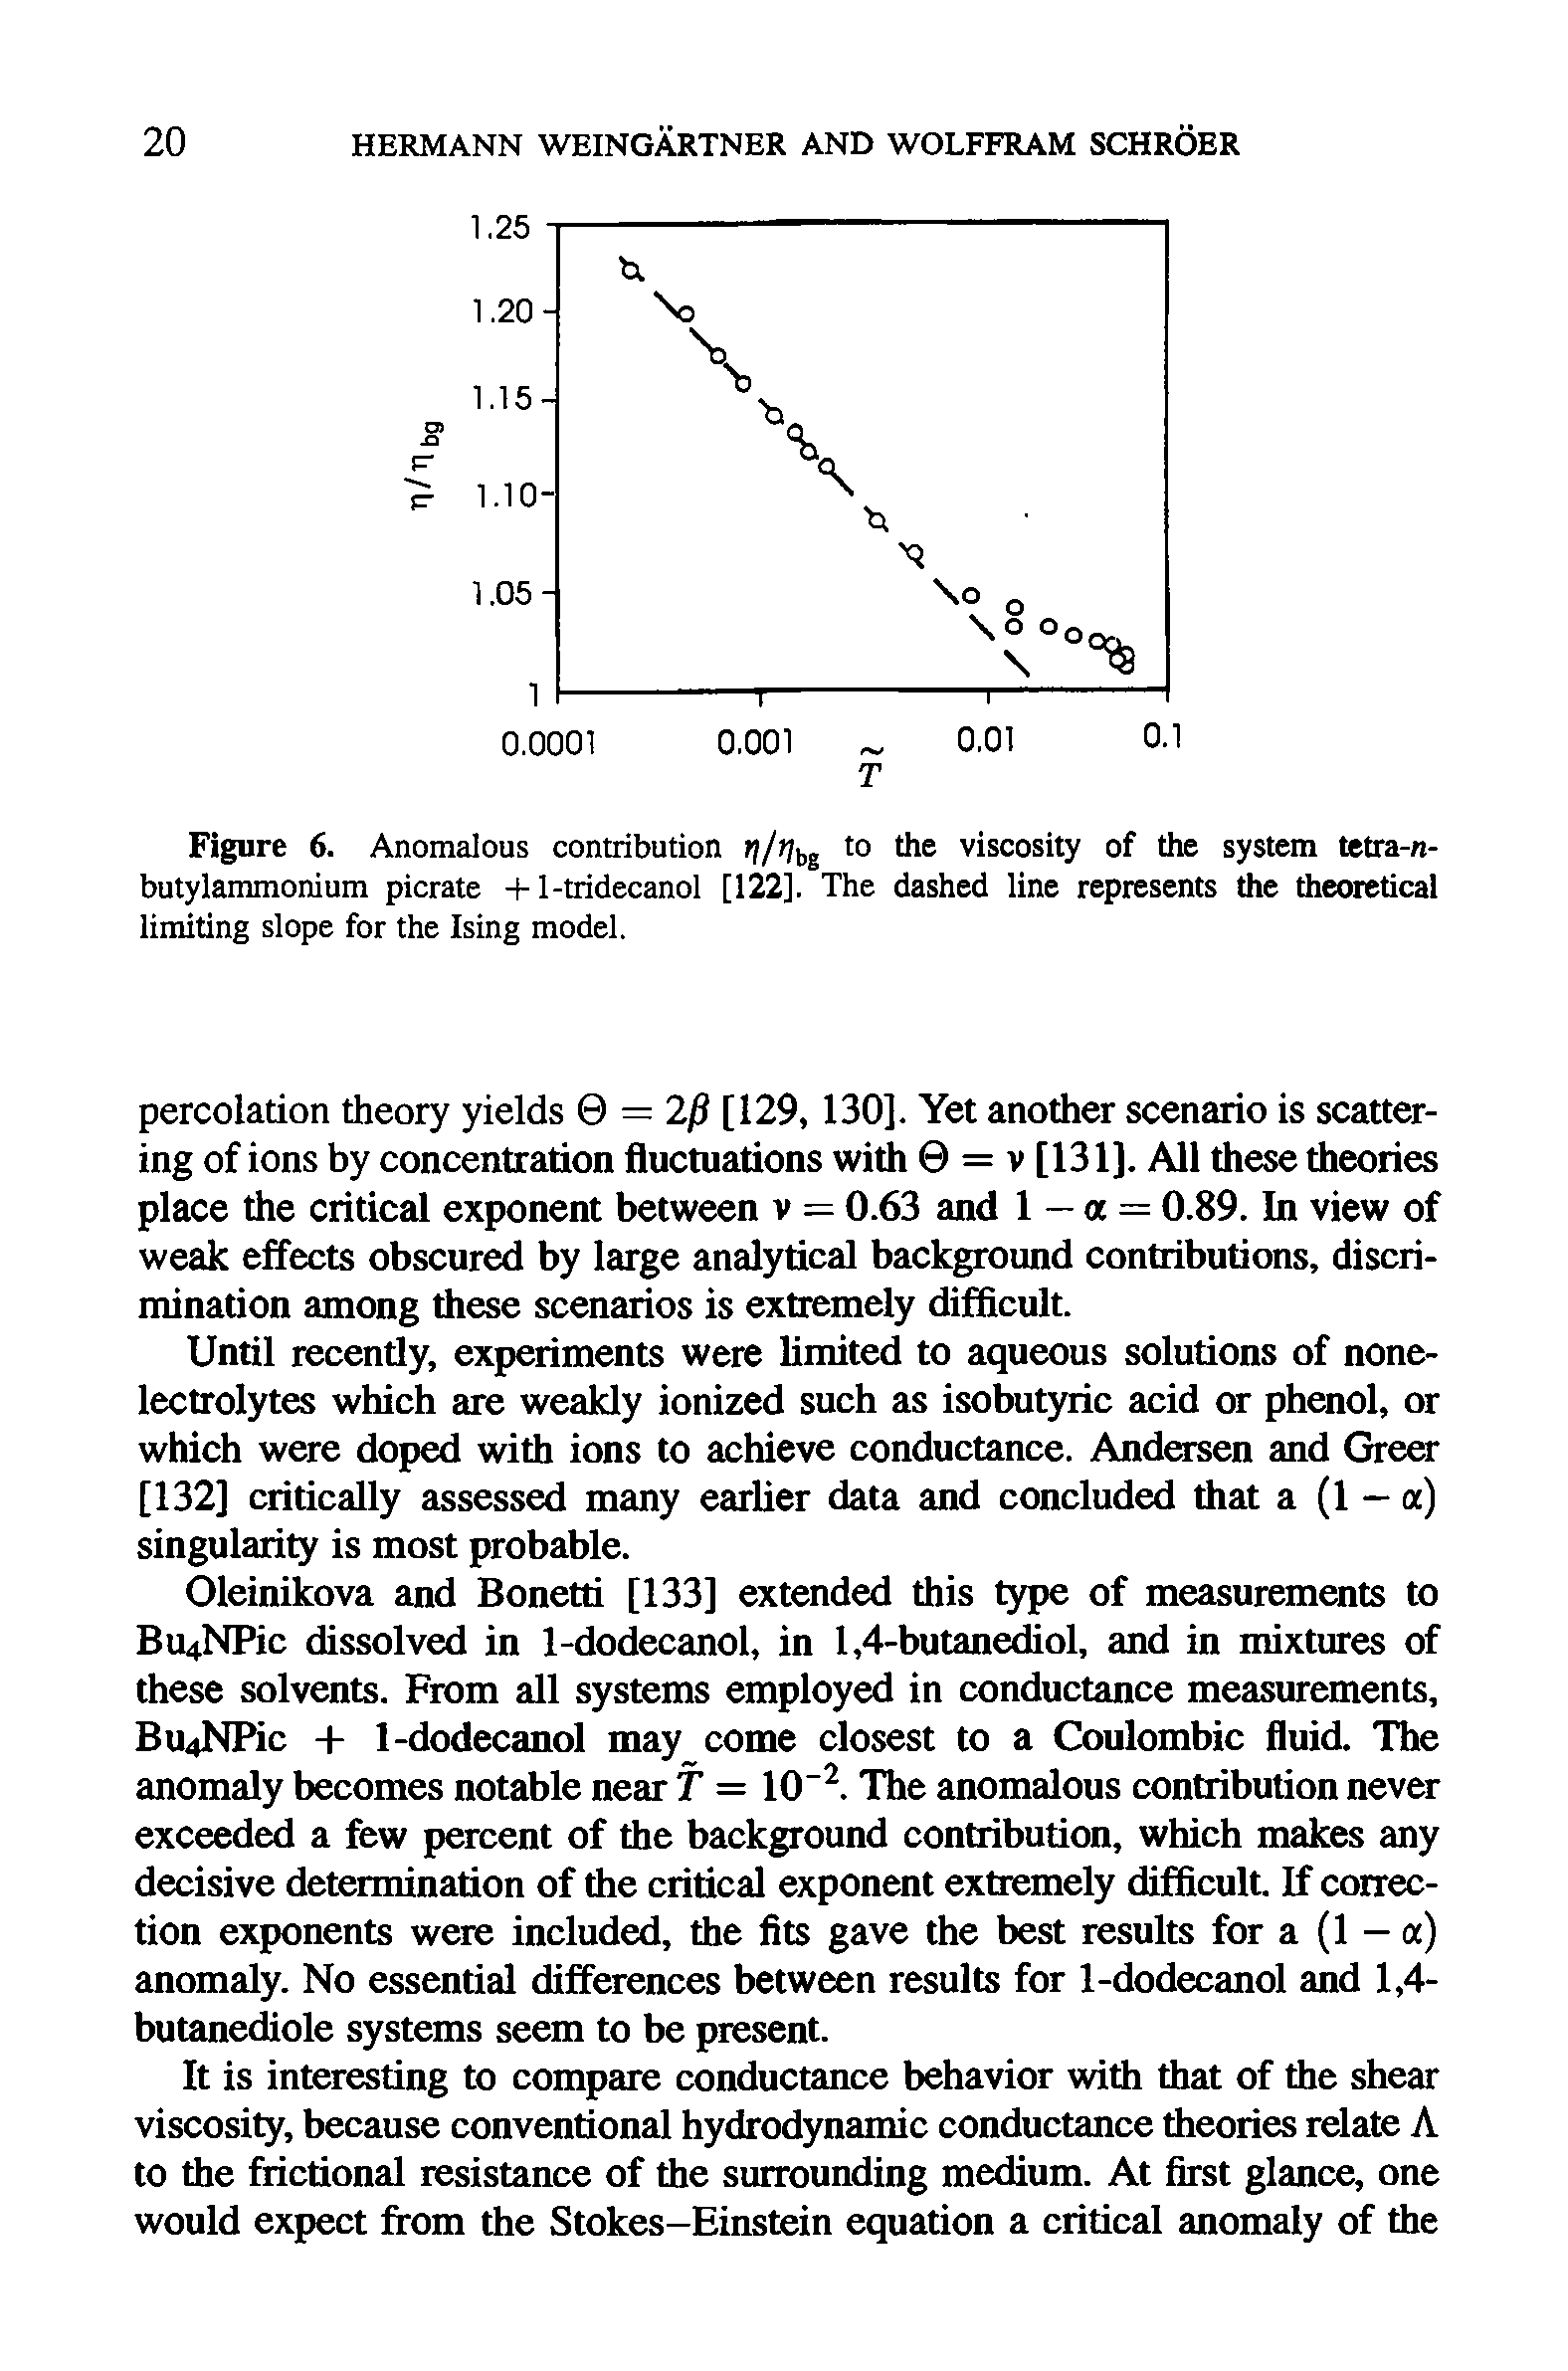 Figure 6. Anomalous contribution t//> bg to the viscosity of the system tetra-n-butylammonium picrate + 1-tridecanol [122]. The dashed line represents the theoretical limiting slope for the Ising model.